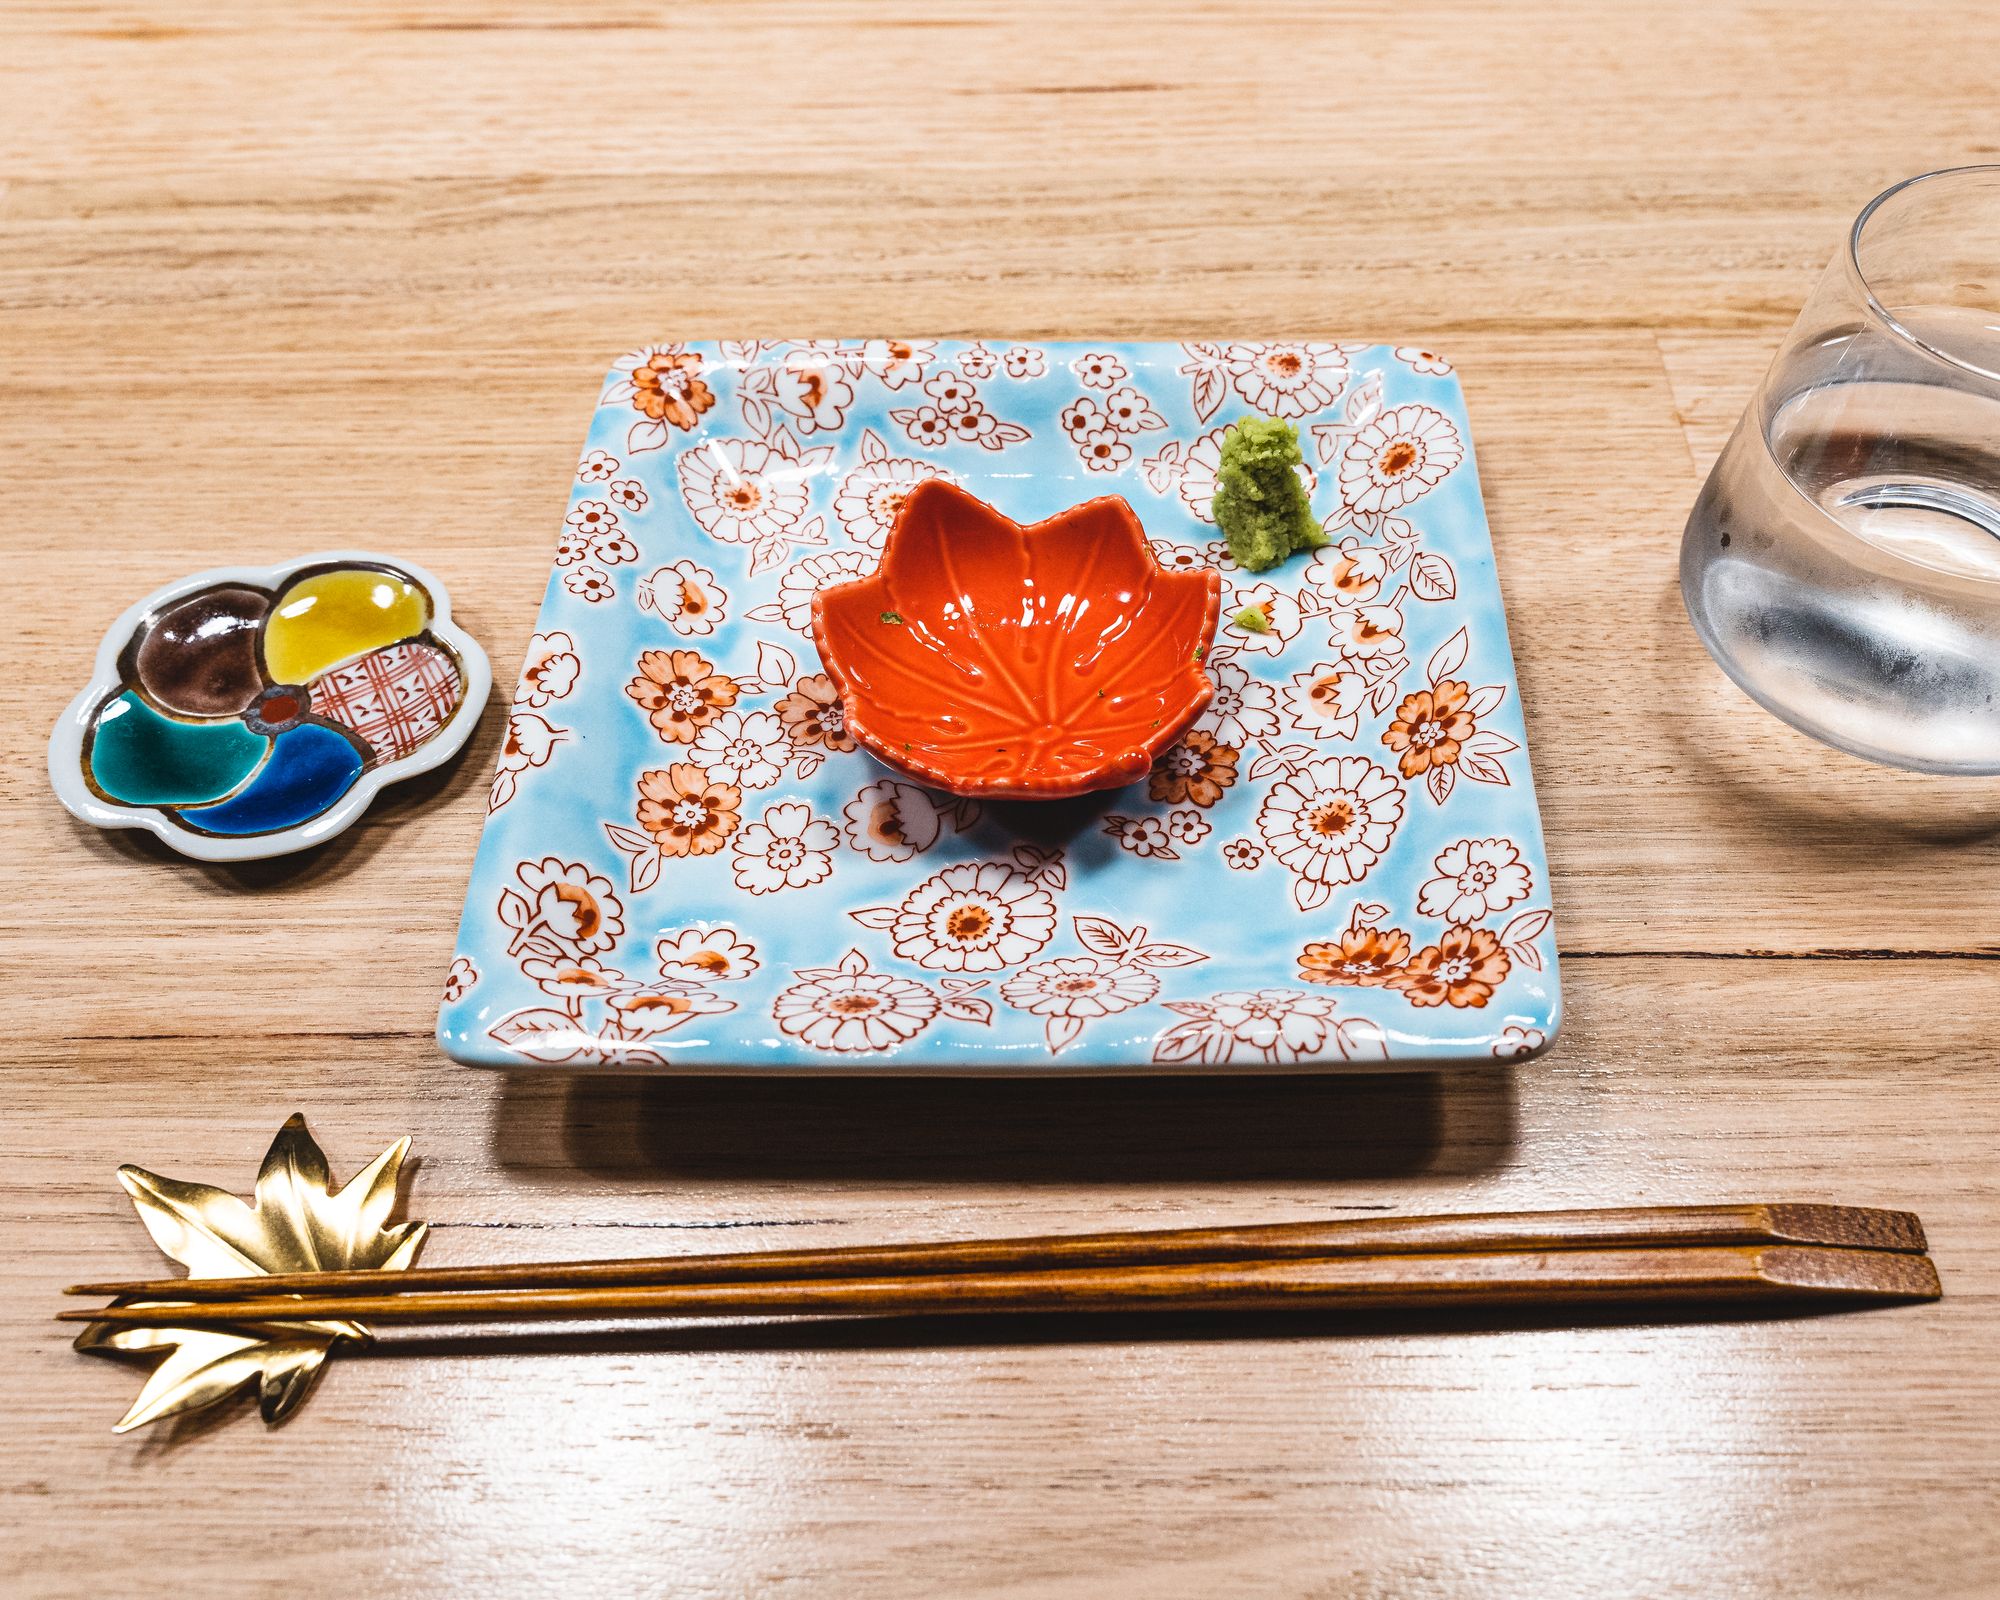 Tablesetting - Japanese plates, a gold maple leaf shaped chopstick rest with a pair of chopsticks on top